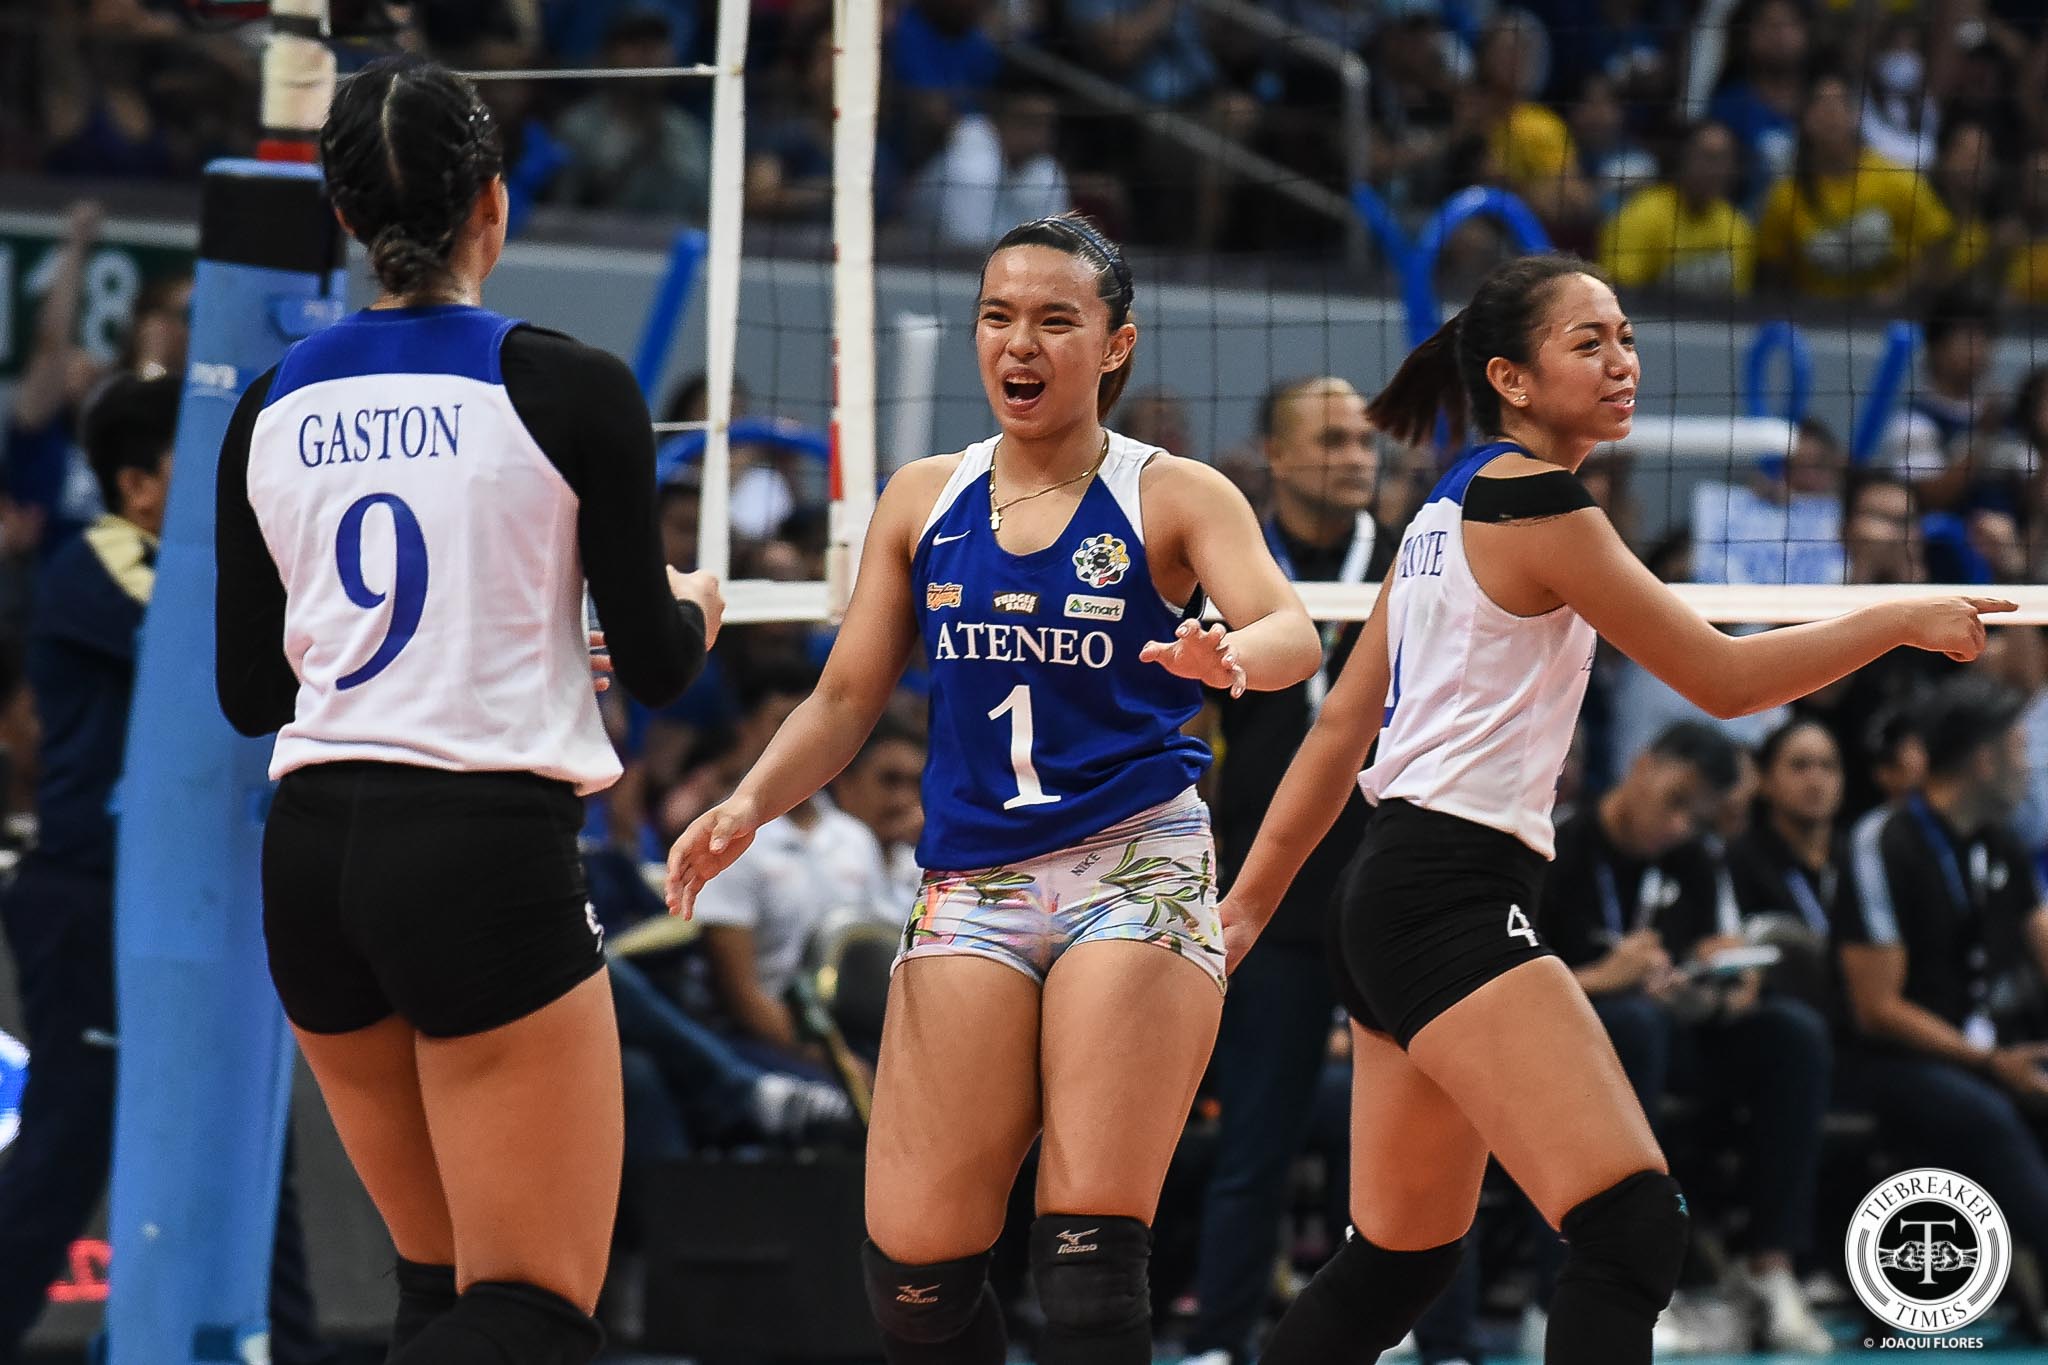 UAAP-81-Volleyball-Finals-ADMU-vs.-UST-Ravena-1714 Winning championships for Ateneo has become Ravena family business ADMU News UAAP Volleyball  - philippine sports news